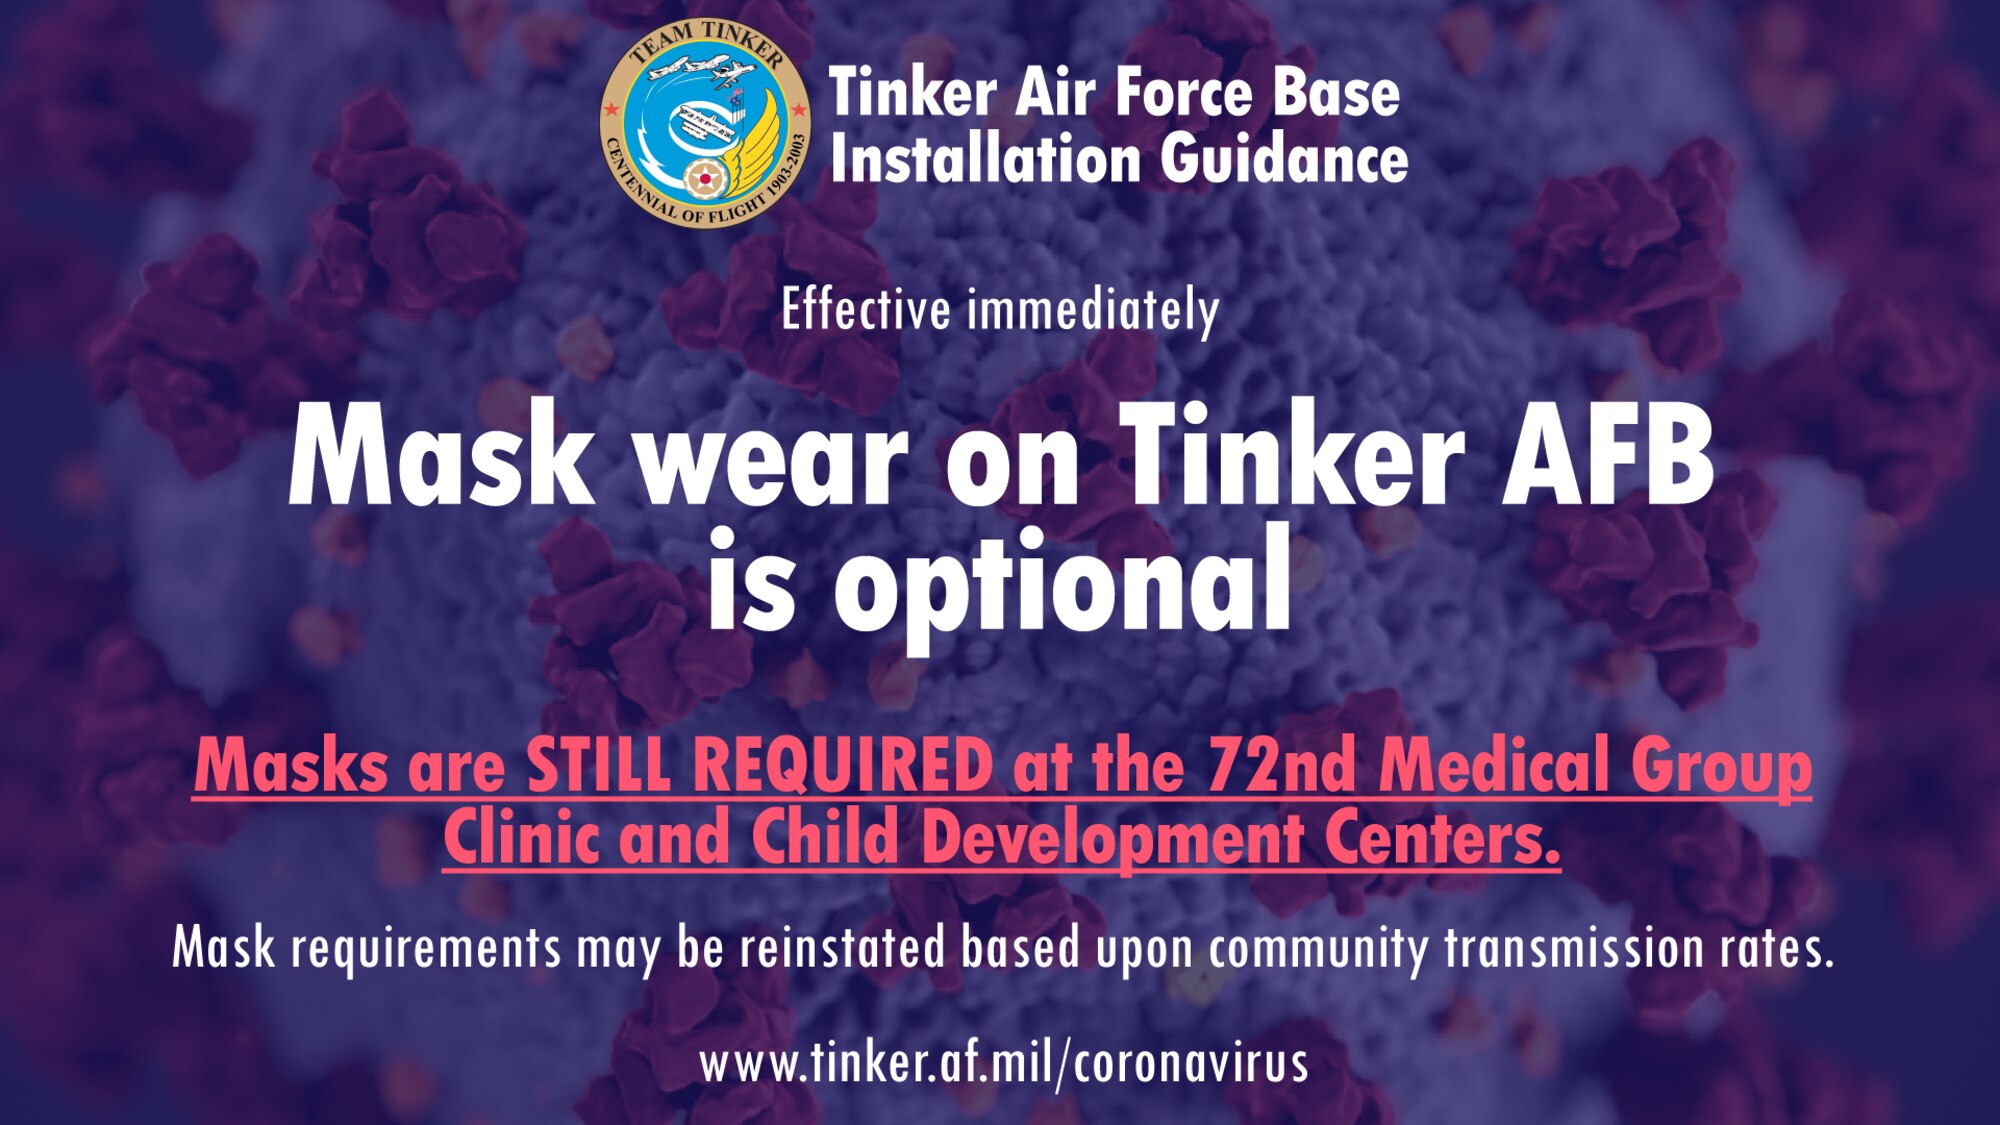 Mask wear optional on Tinker AFB graphic